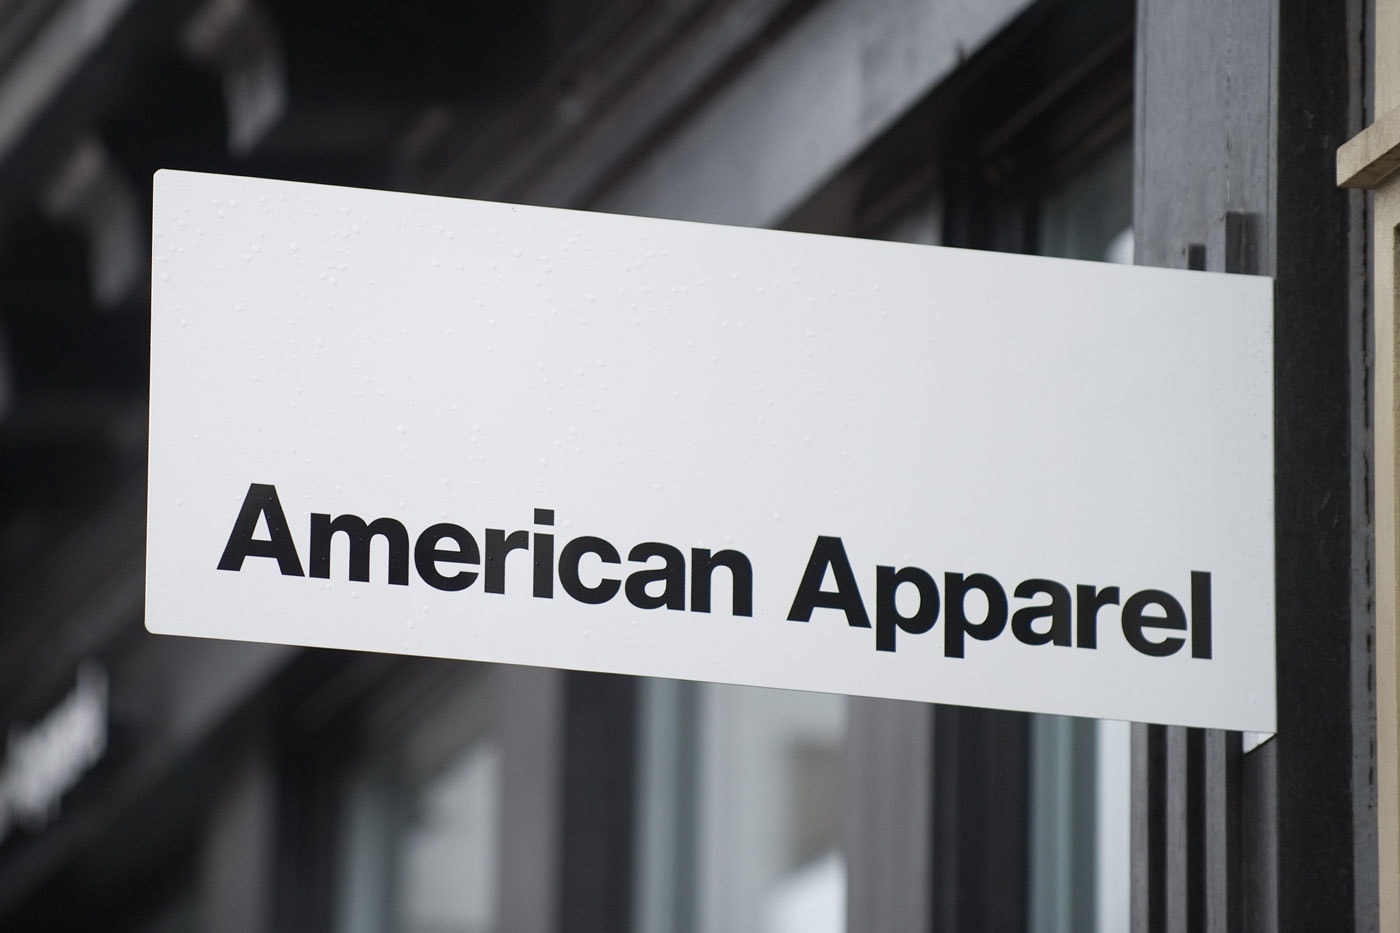 American Apparel's rebrand says a lot about life after bankruptcy